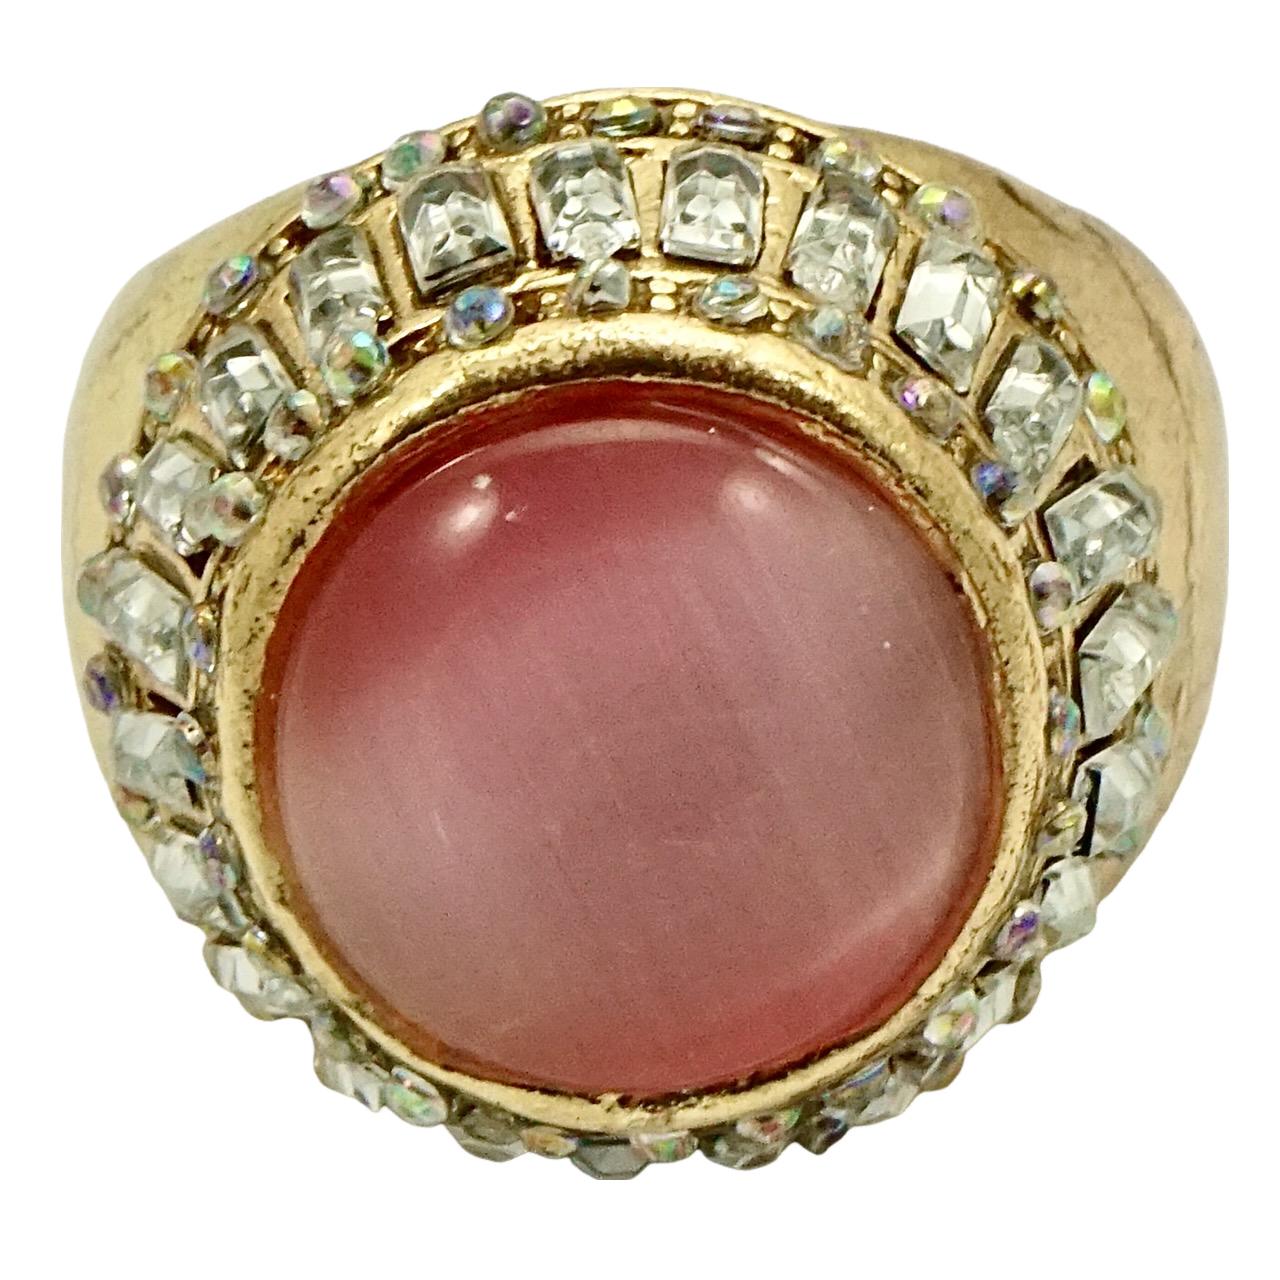 Beautiful gold plated cocktail ring, set with a pink moonglow surrounded by clear baguette and aurora borealis round crystals. Ring size UK Q, US 8. Inside diameter 1.9 cm / .74 inch. The ring is in very good condition.

This glamorous cocktail ring